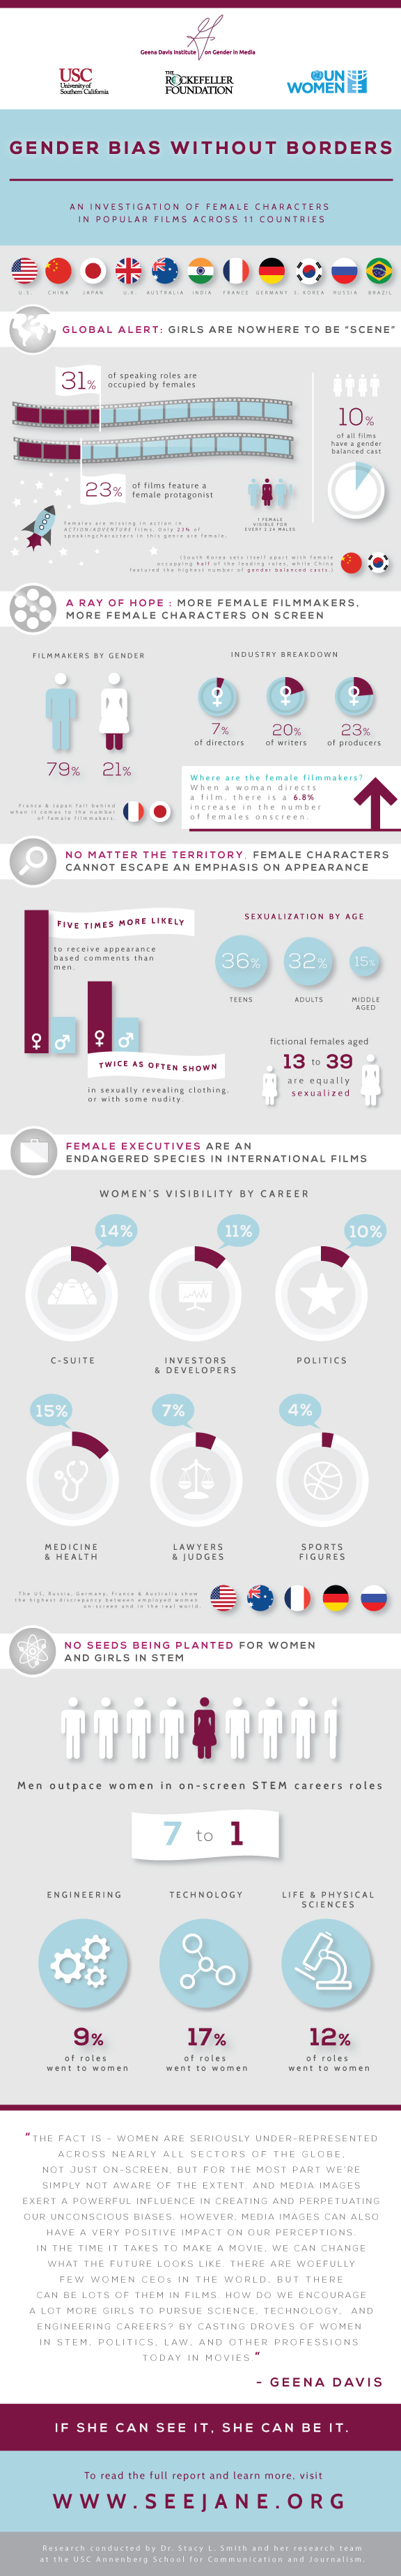 Gender Bias Without Borders Infographic